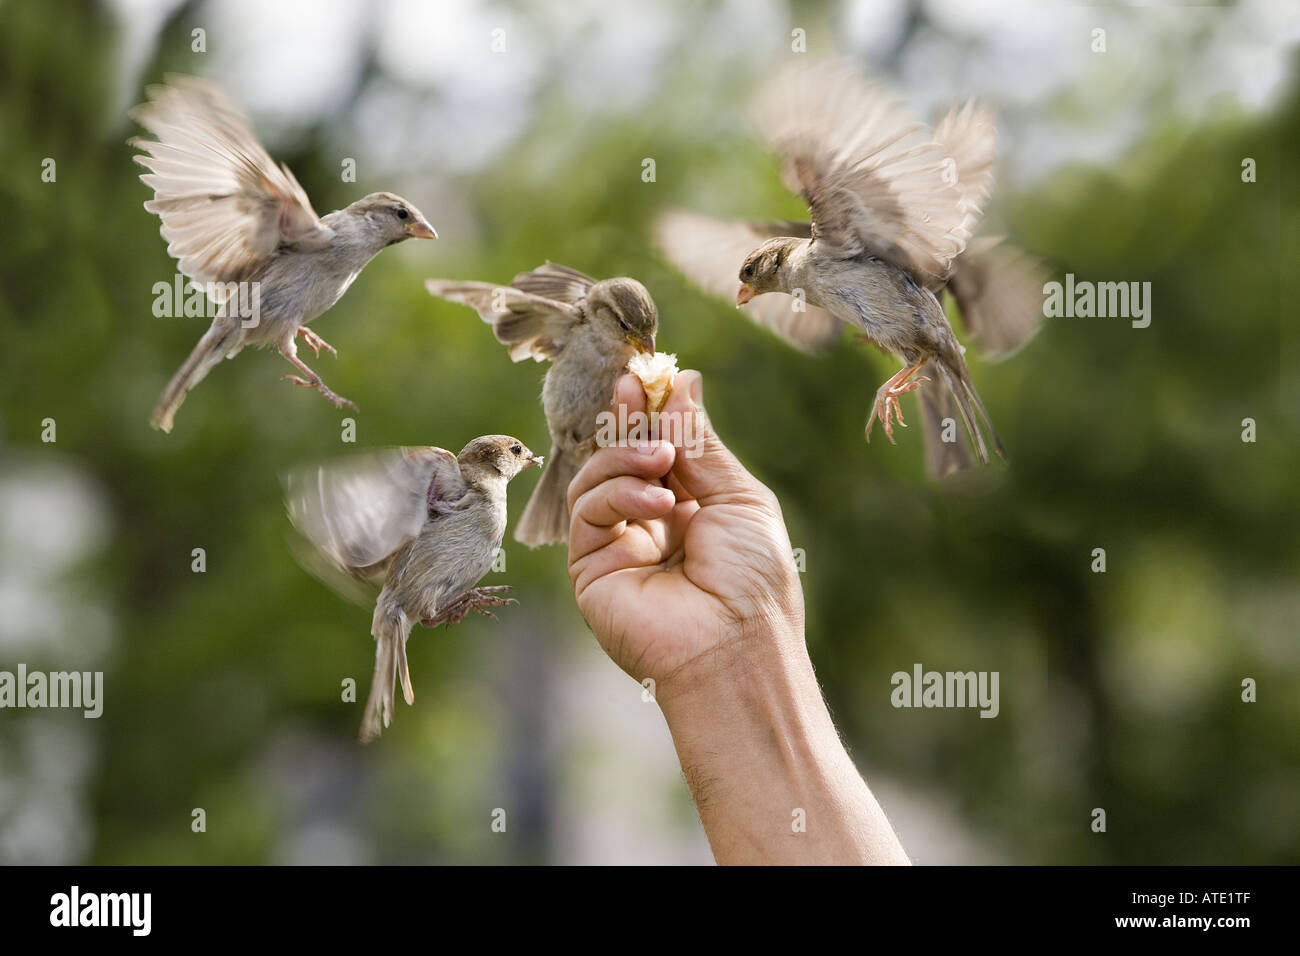 Birds taking food from a hand, Paris, France Stock Photo